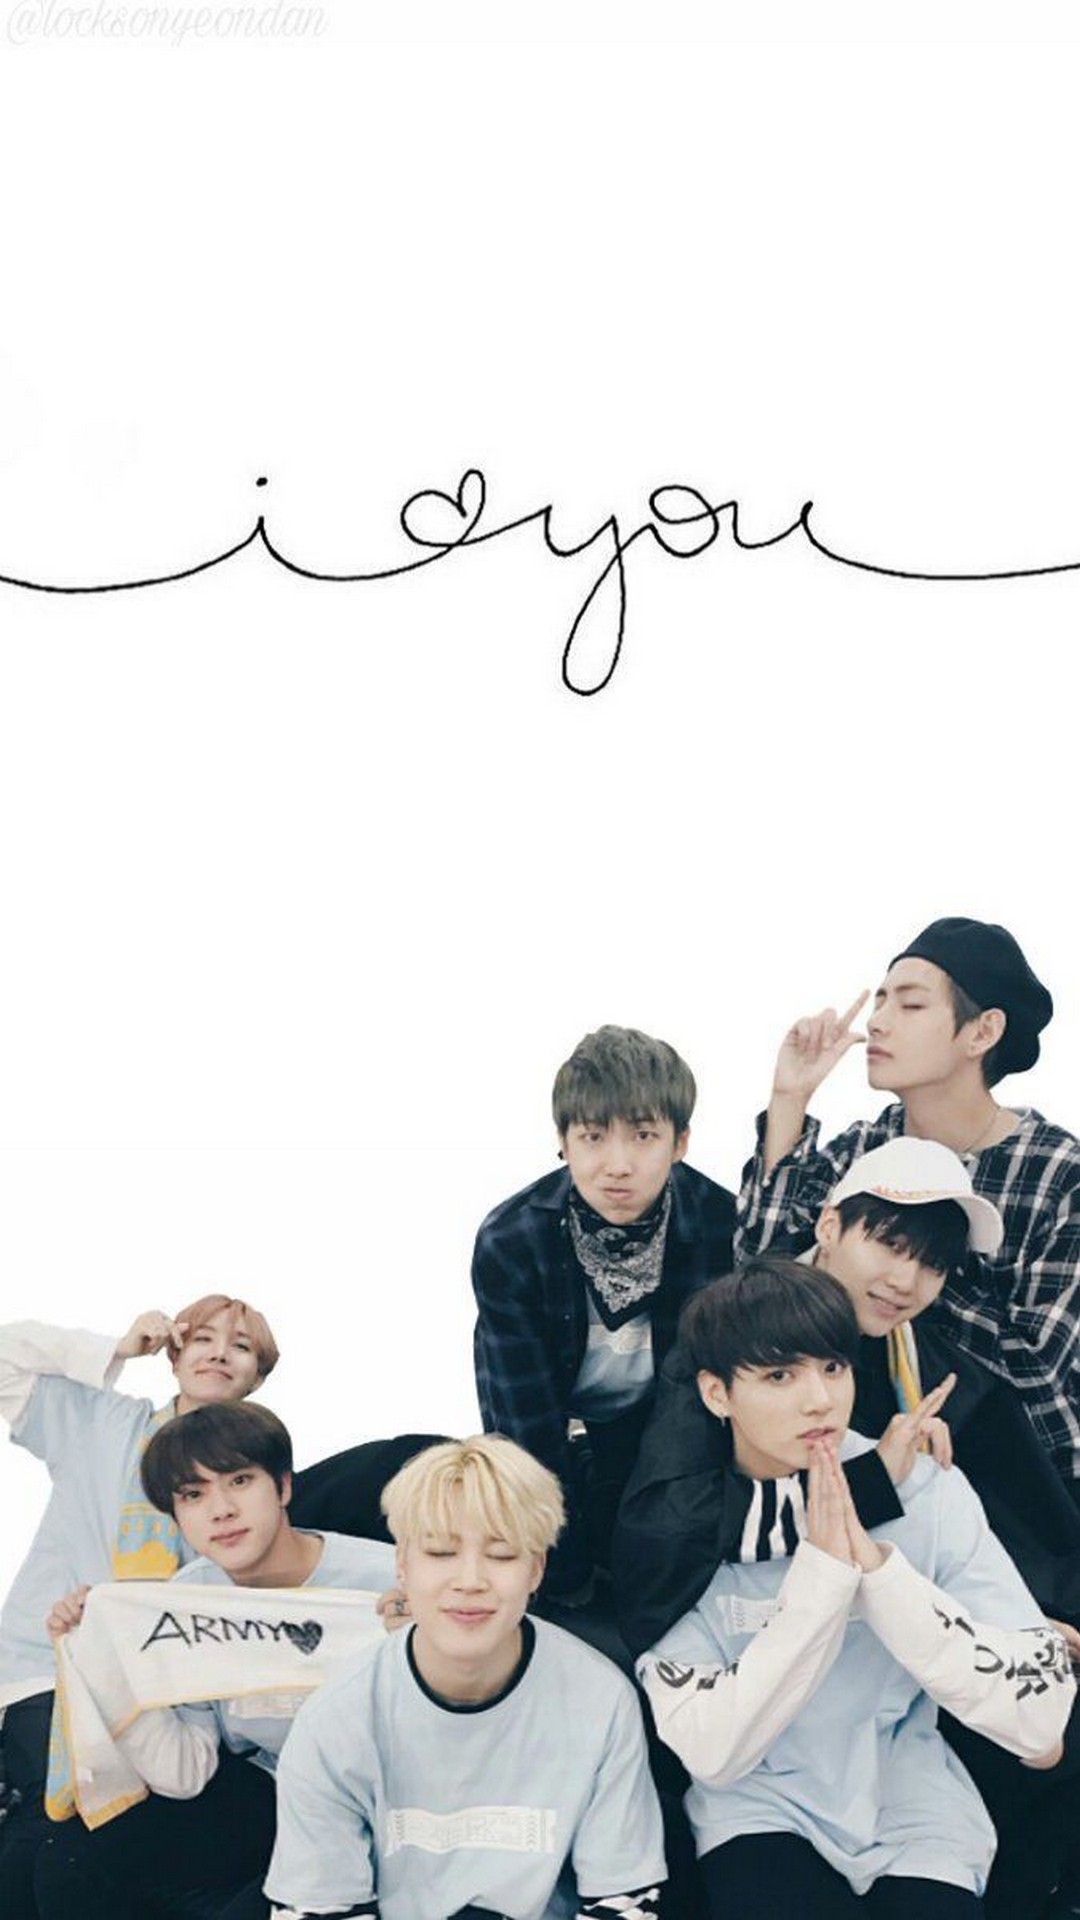 Bts Live Wallpaper For iPhone.GiftWatches.CO